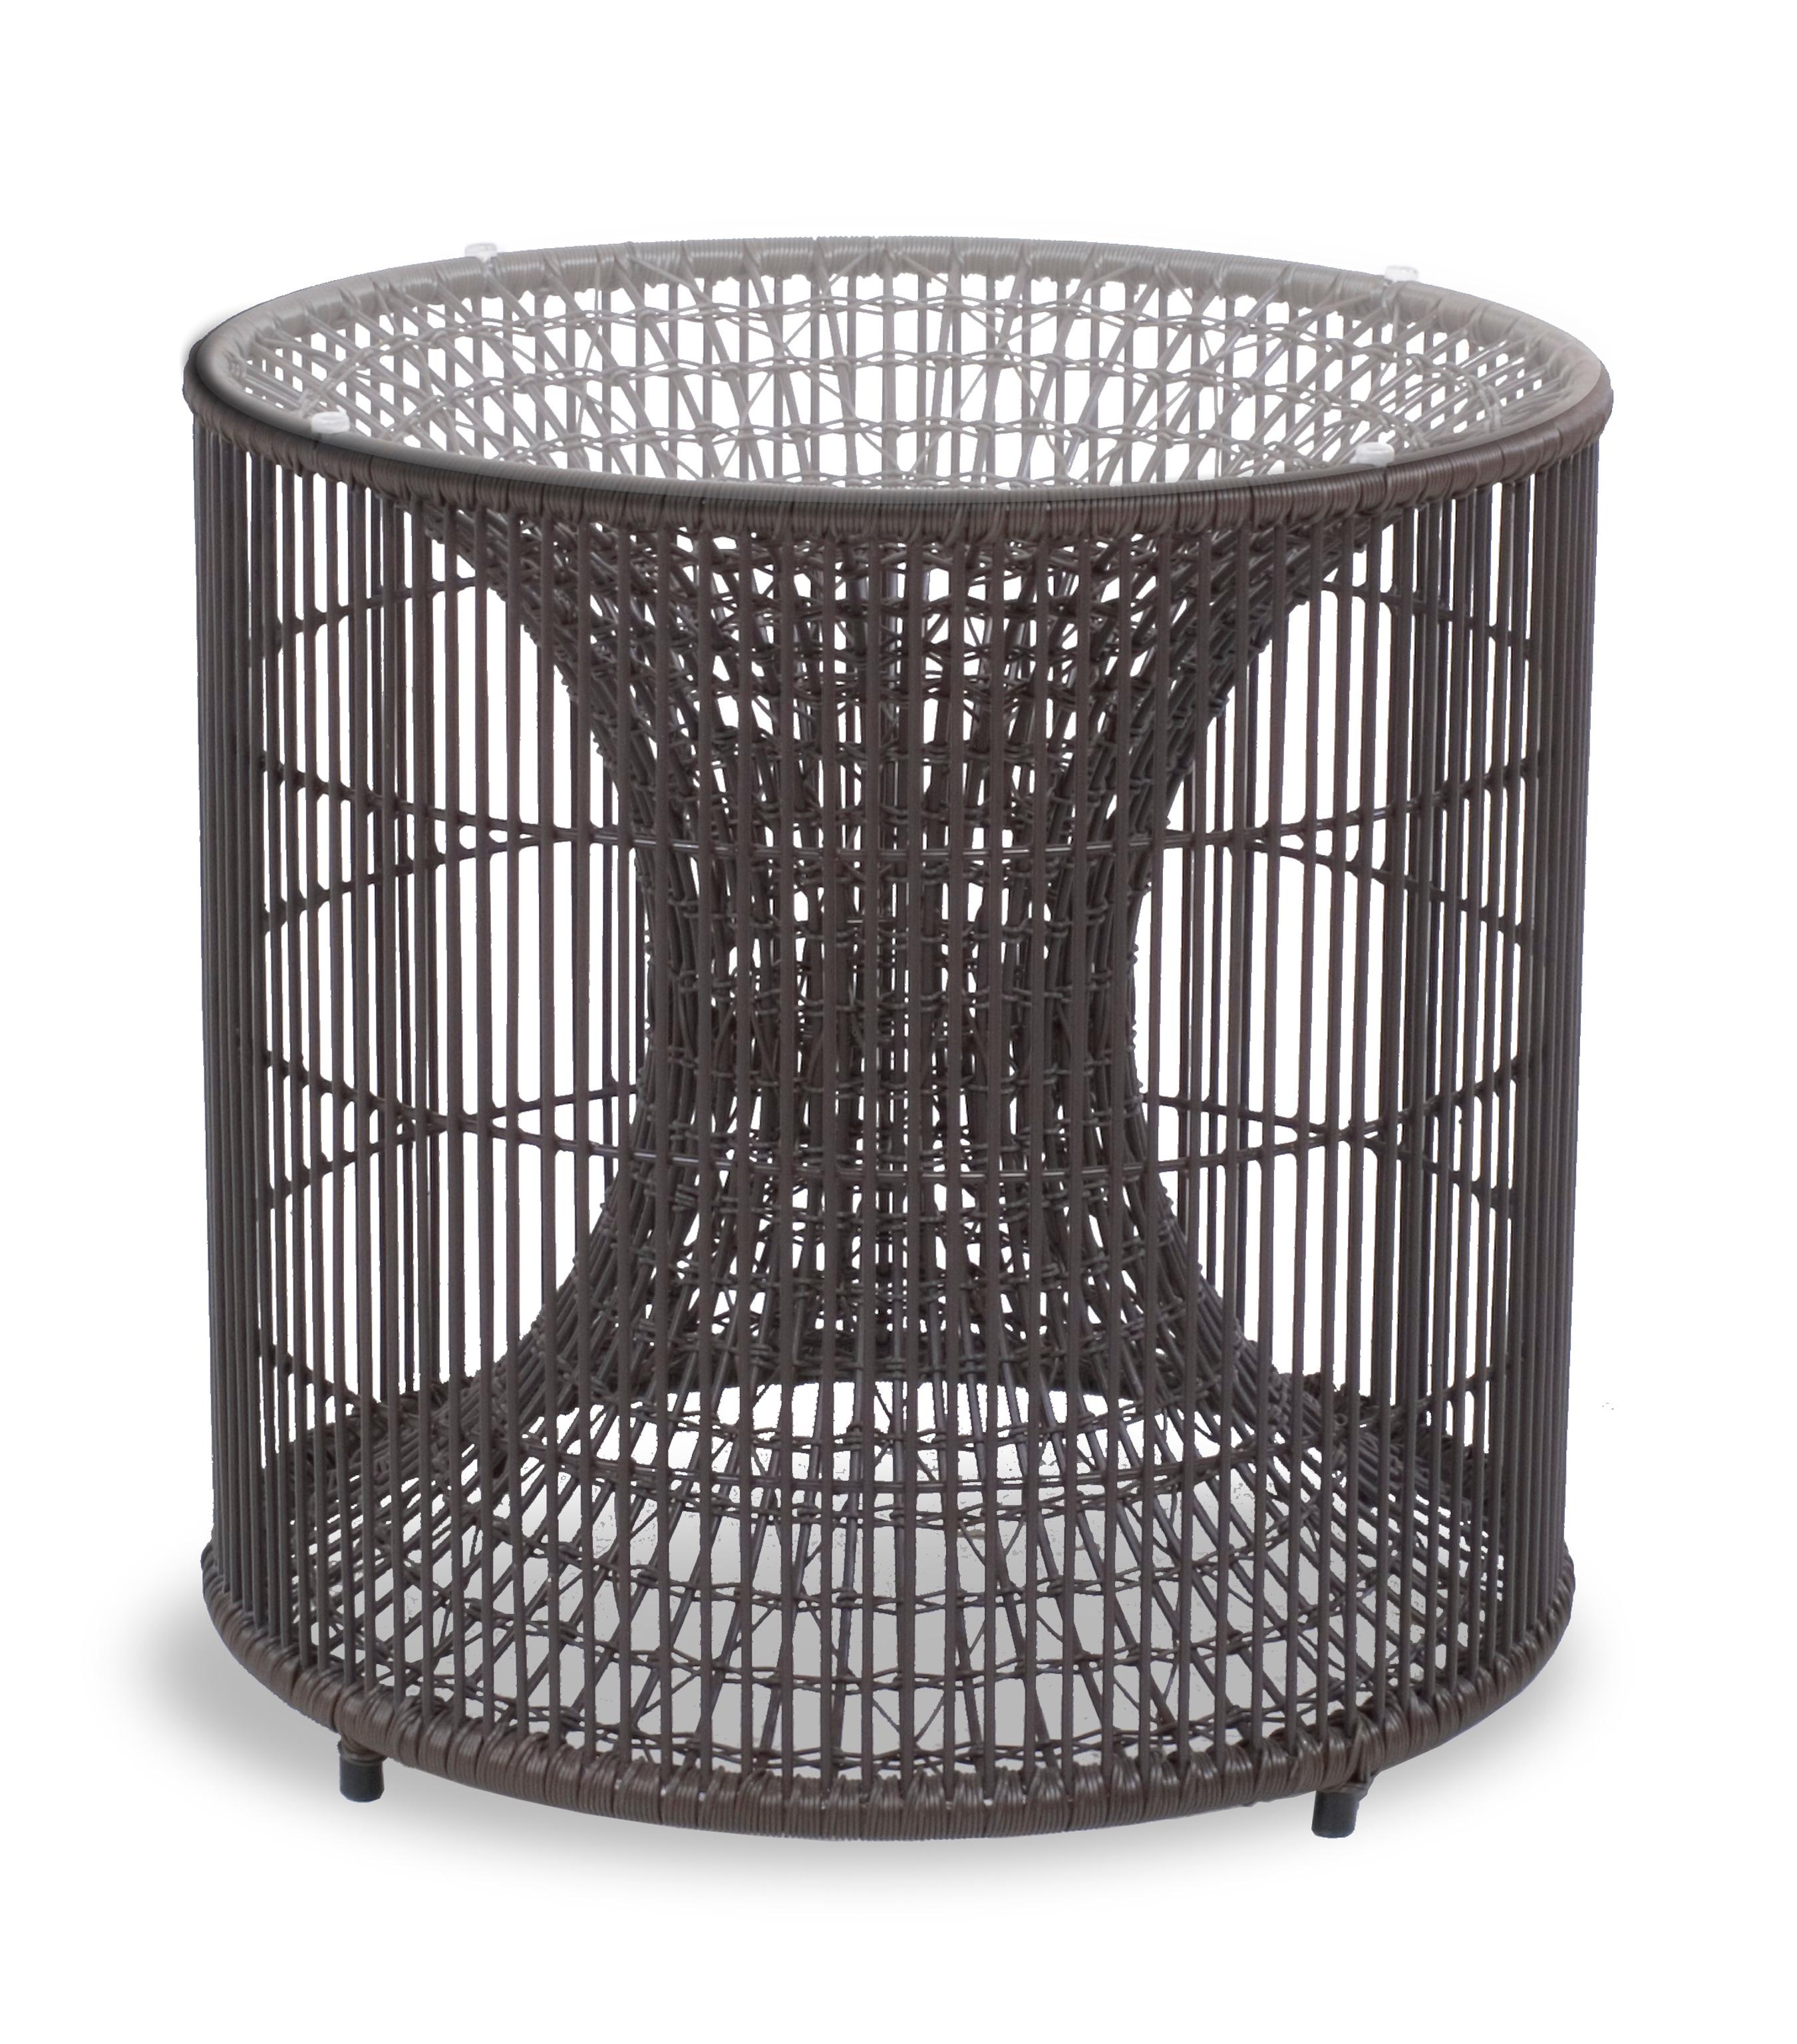 Amaya end table by Kenneth Cobonpue
Materials: Polyethelene. Steel. Glass.
Dimensions: Diameter 51cm x Height 49cm.

Inspired by fish traps, the Amaya tables resemble a vortex enclosed within a cylinder. While the indoor version is crafted with